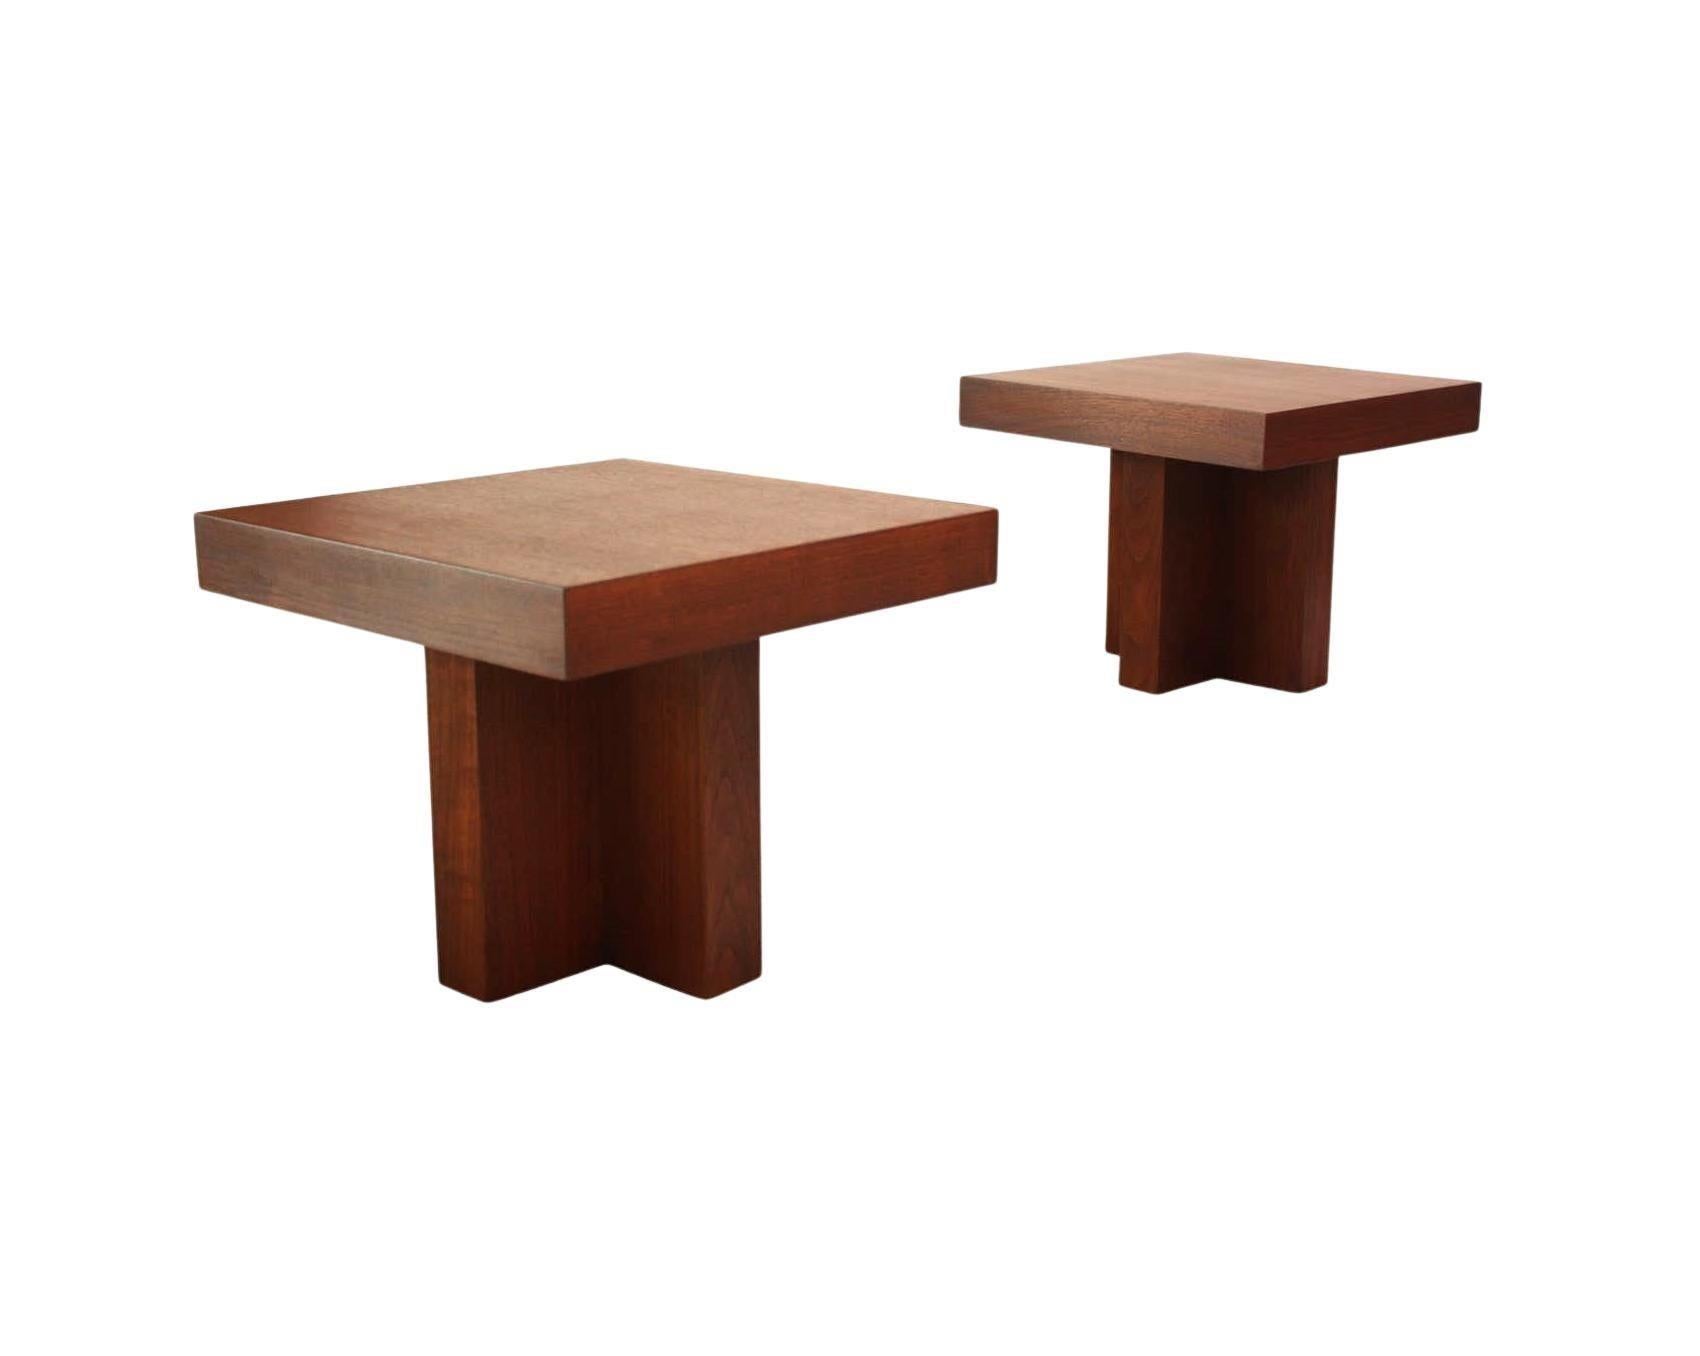 Architectural Modernist Design! Pair of walnut occasional tables Model 1922, by Milo Baughman for Thayer Coggin, circa 1960s. Featuring incredibly proportioned thick tops resting on modern cruciform bases. These tables have a clean lined design,